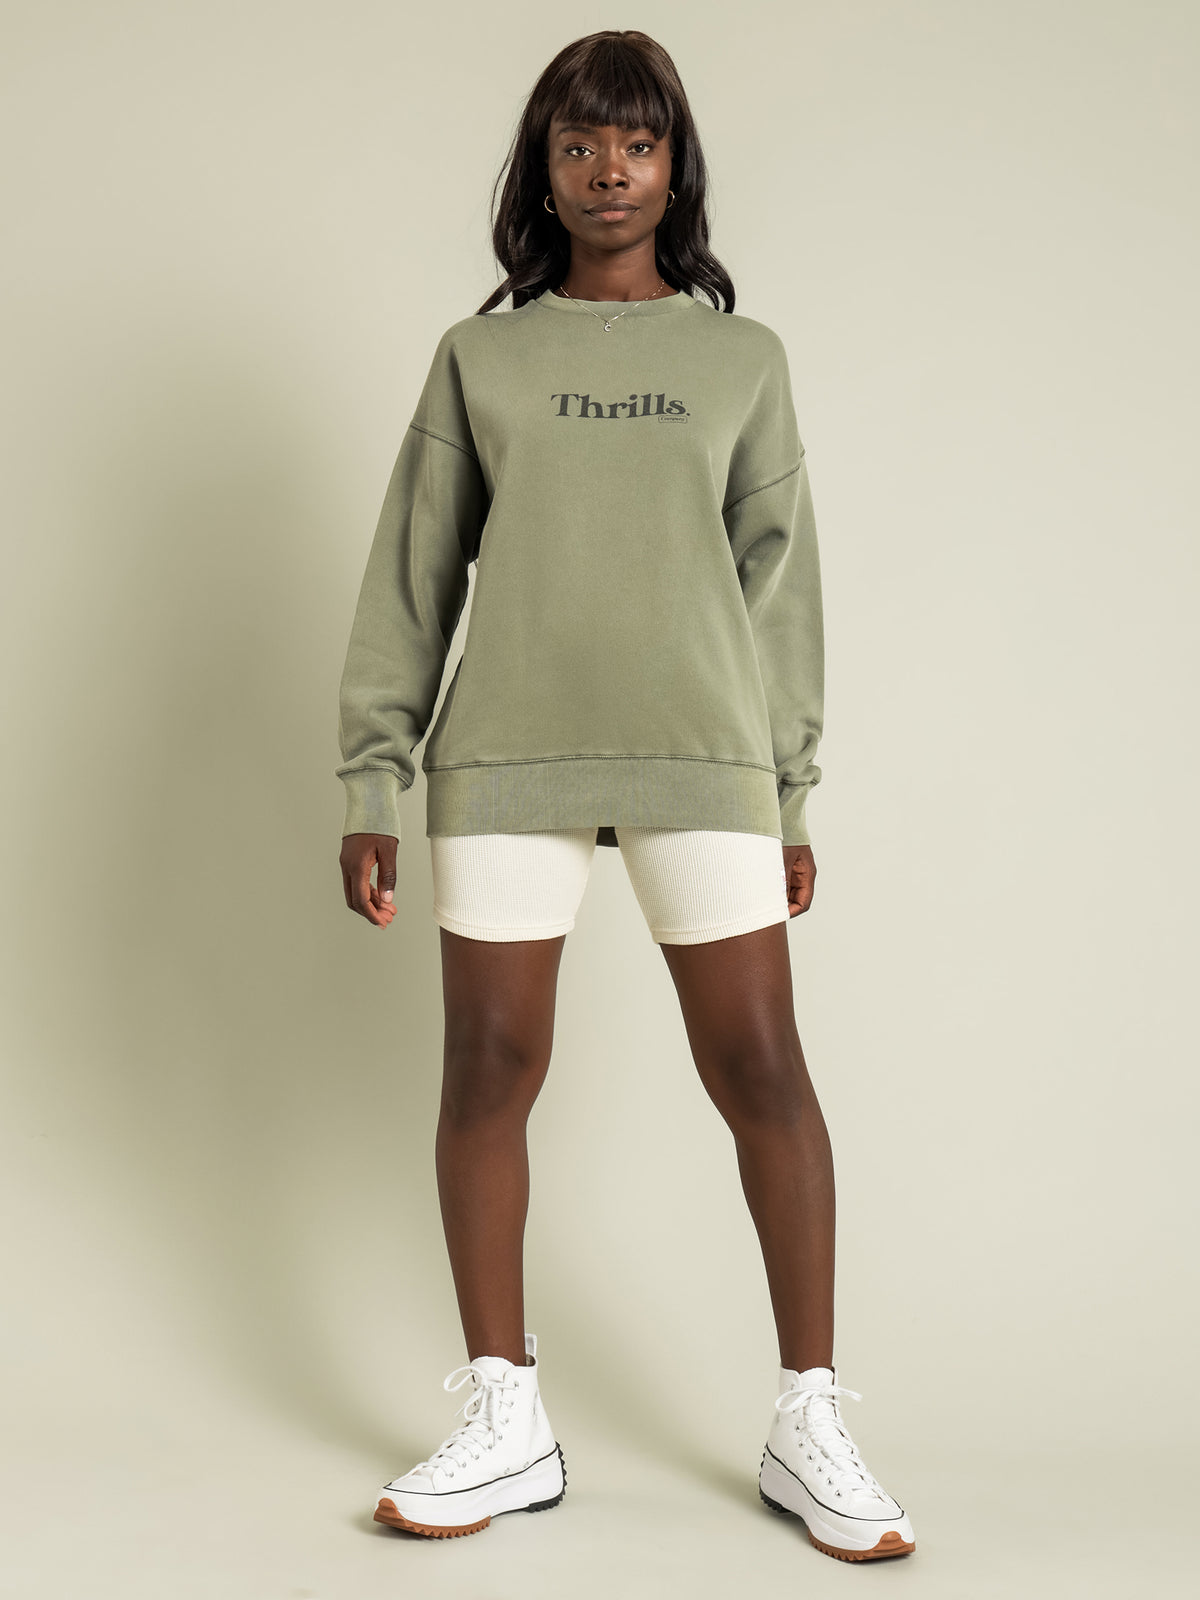 Enchantment Slouch Jumper in Army Green